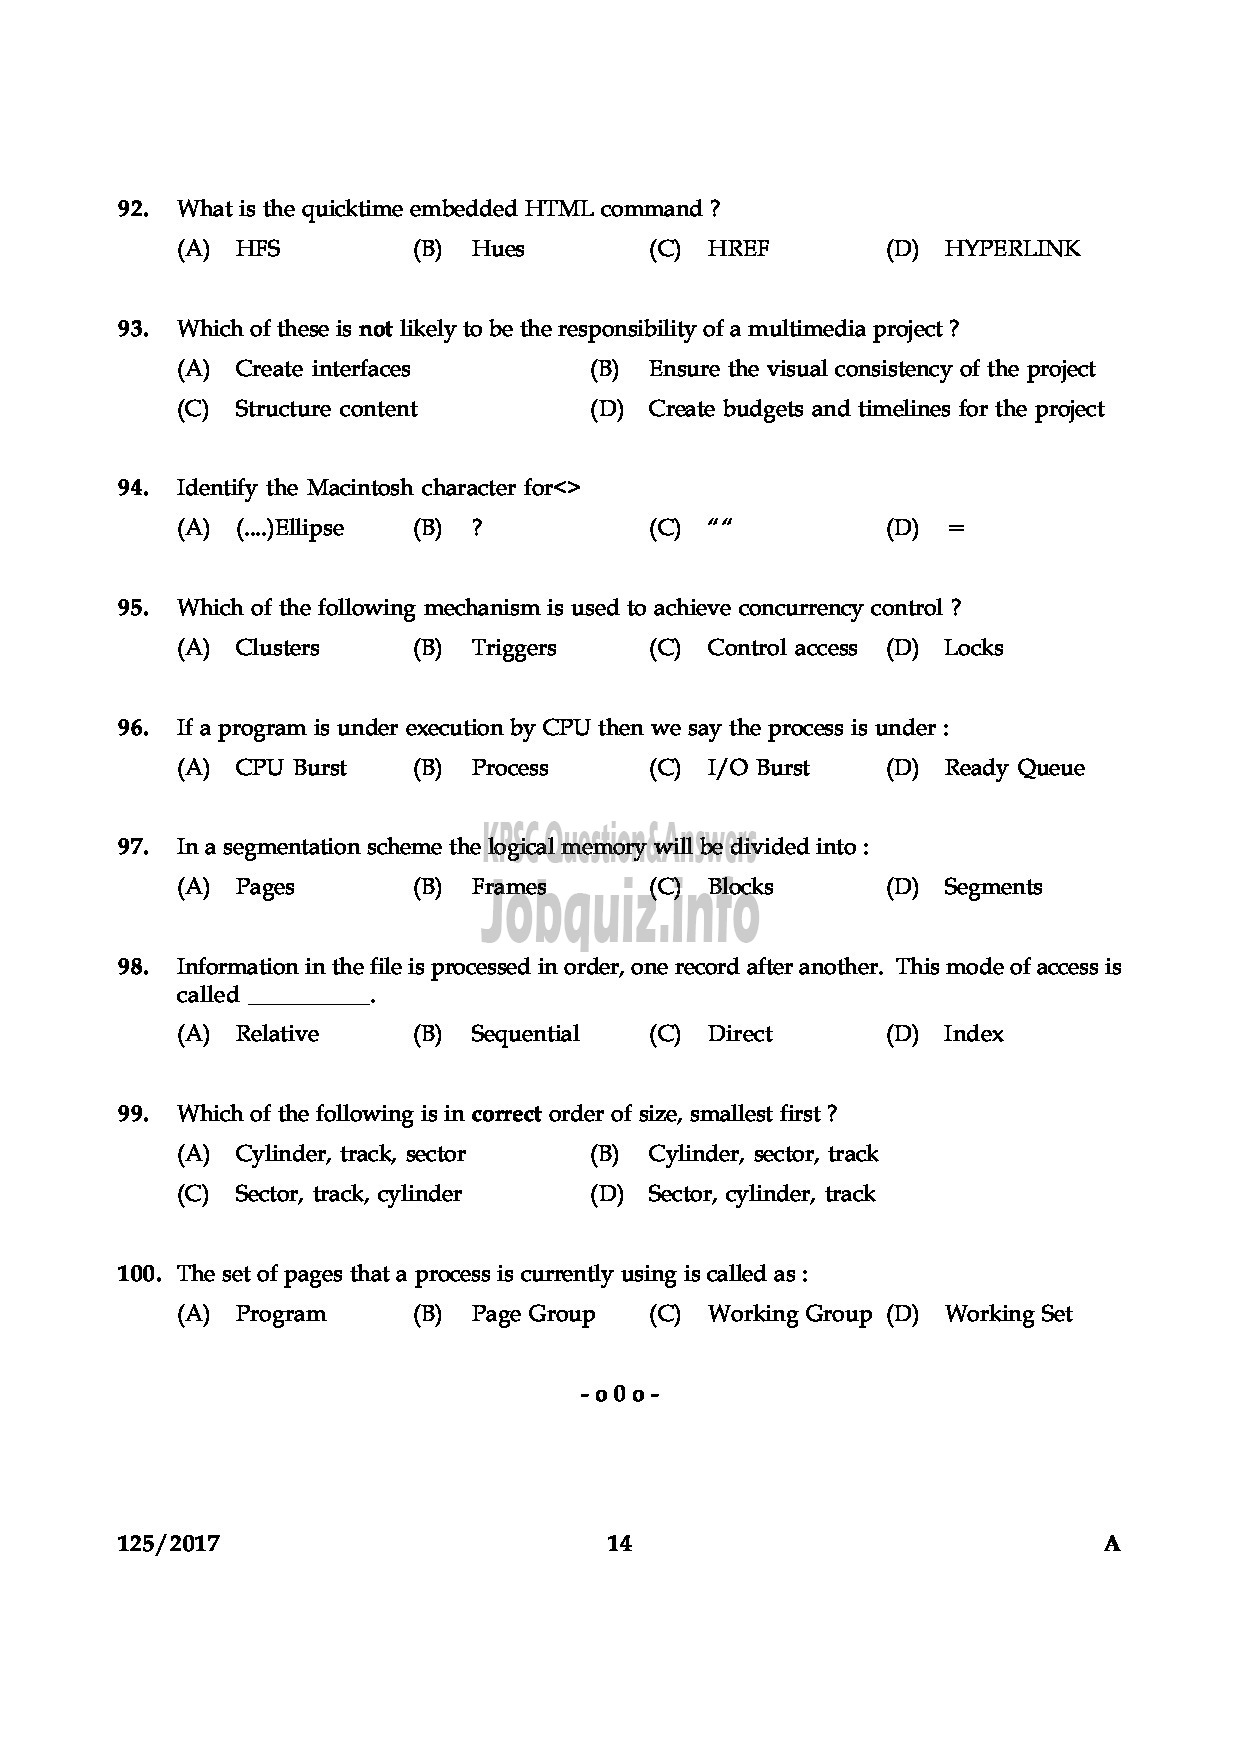 Kerala PSC Question Paper - LECTURER IN COMPUTER APPLICATION COLLEGIATE EDUCATION-14